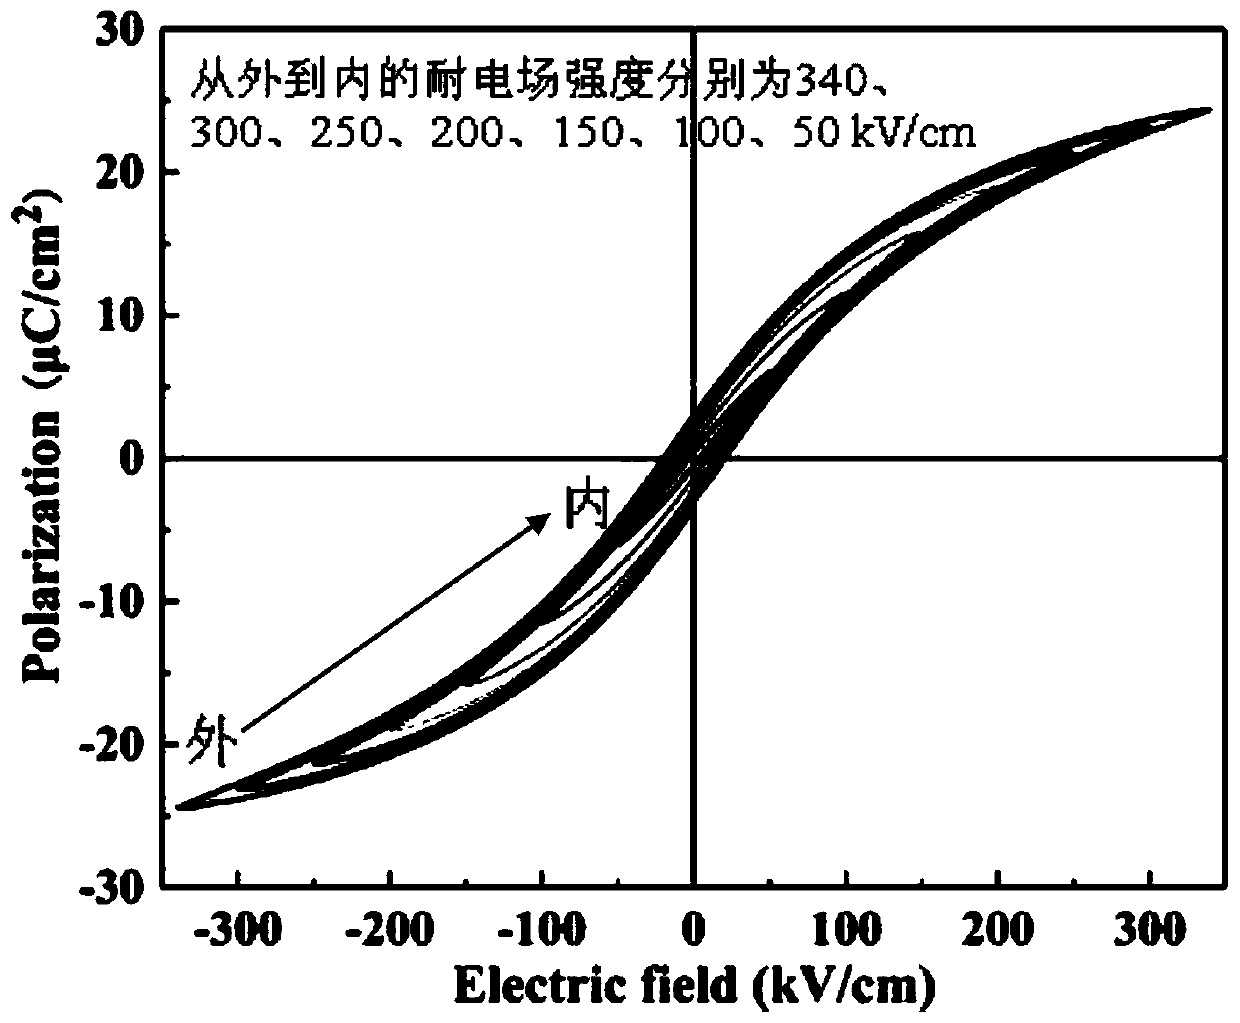 High-electric-field-resistant high-energy-density barium titanate-based relaxor ferroelectric ceramic material and preparation method thereof